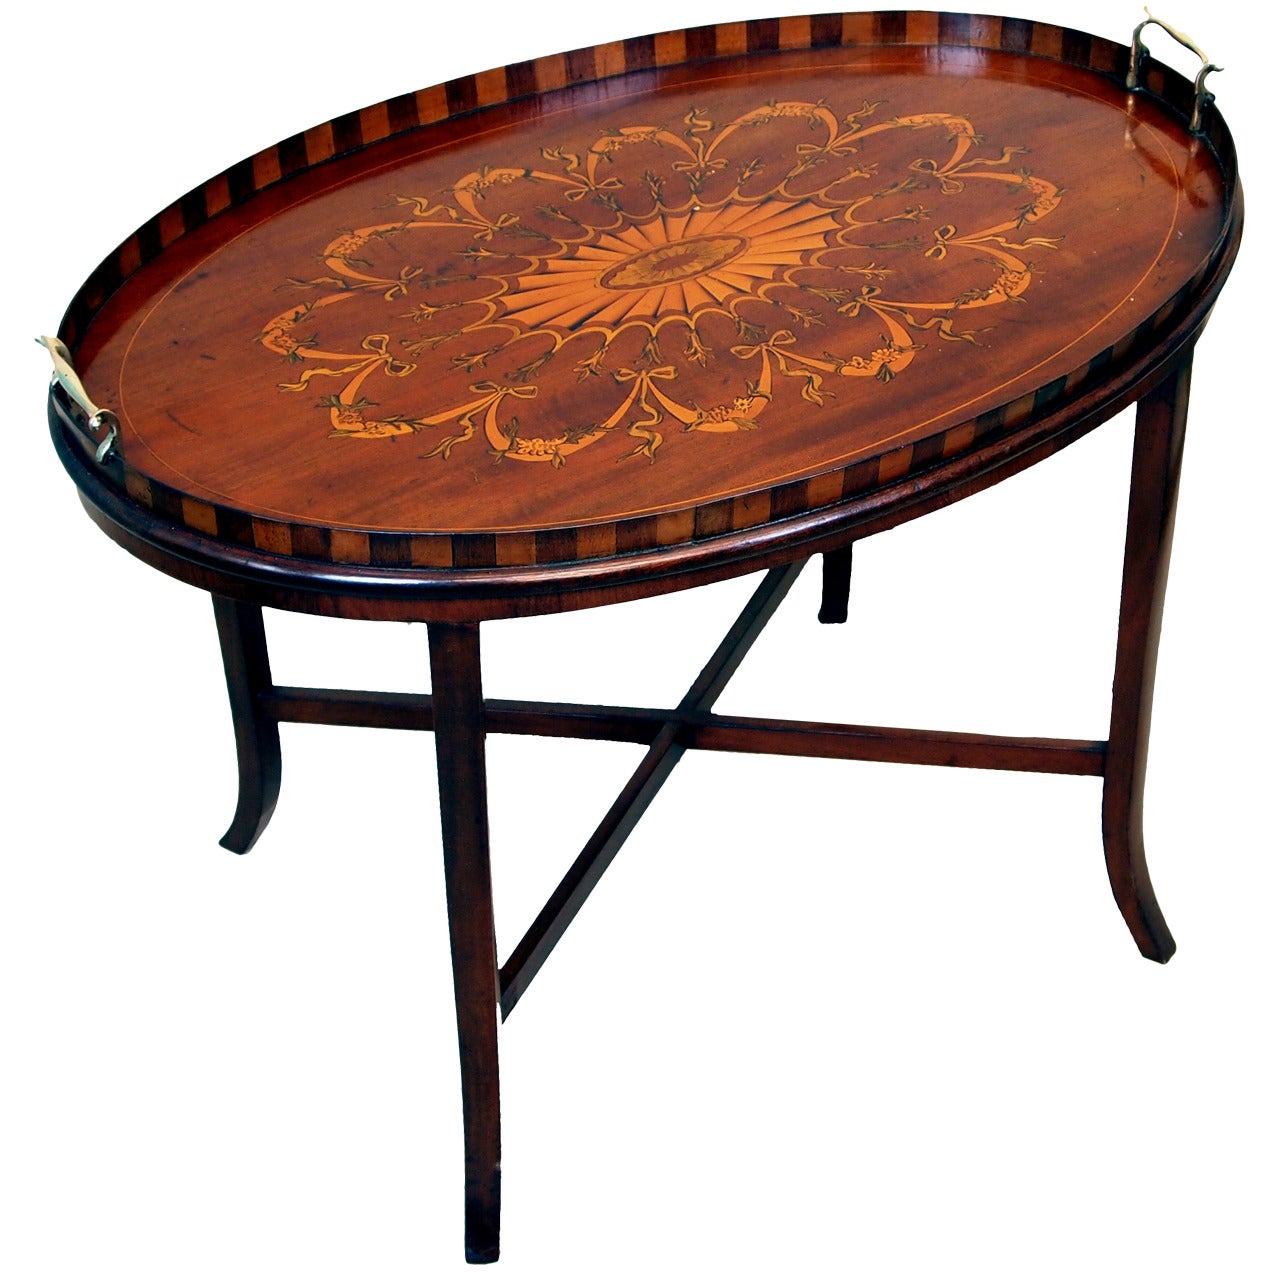 Antique Mahogany Oval Tray on Stand